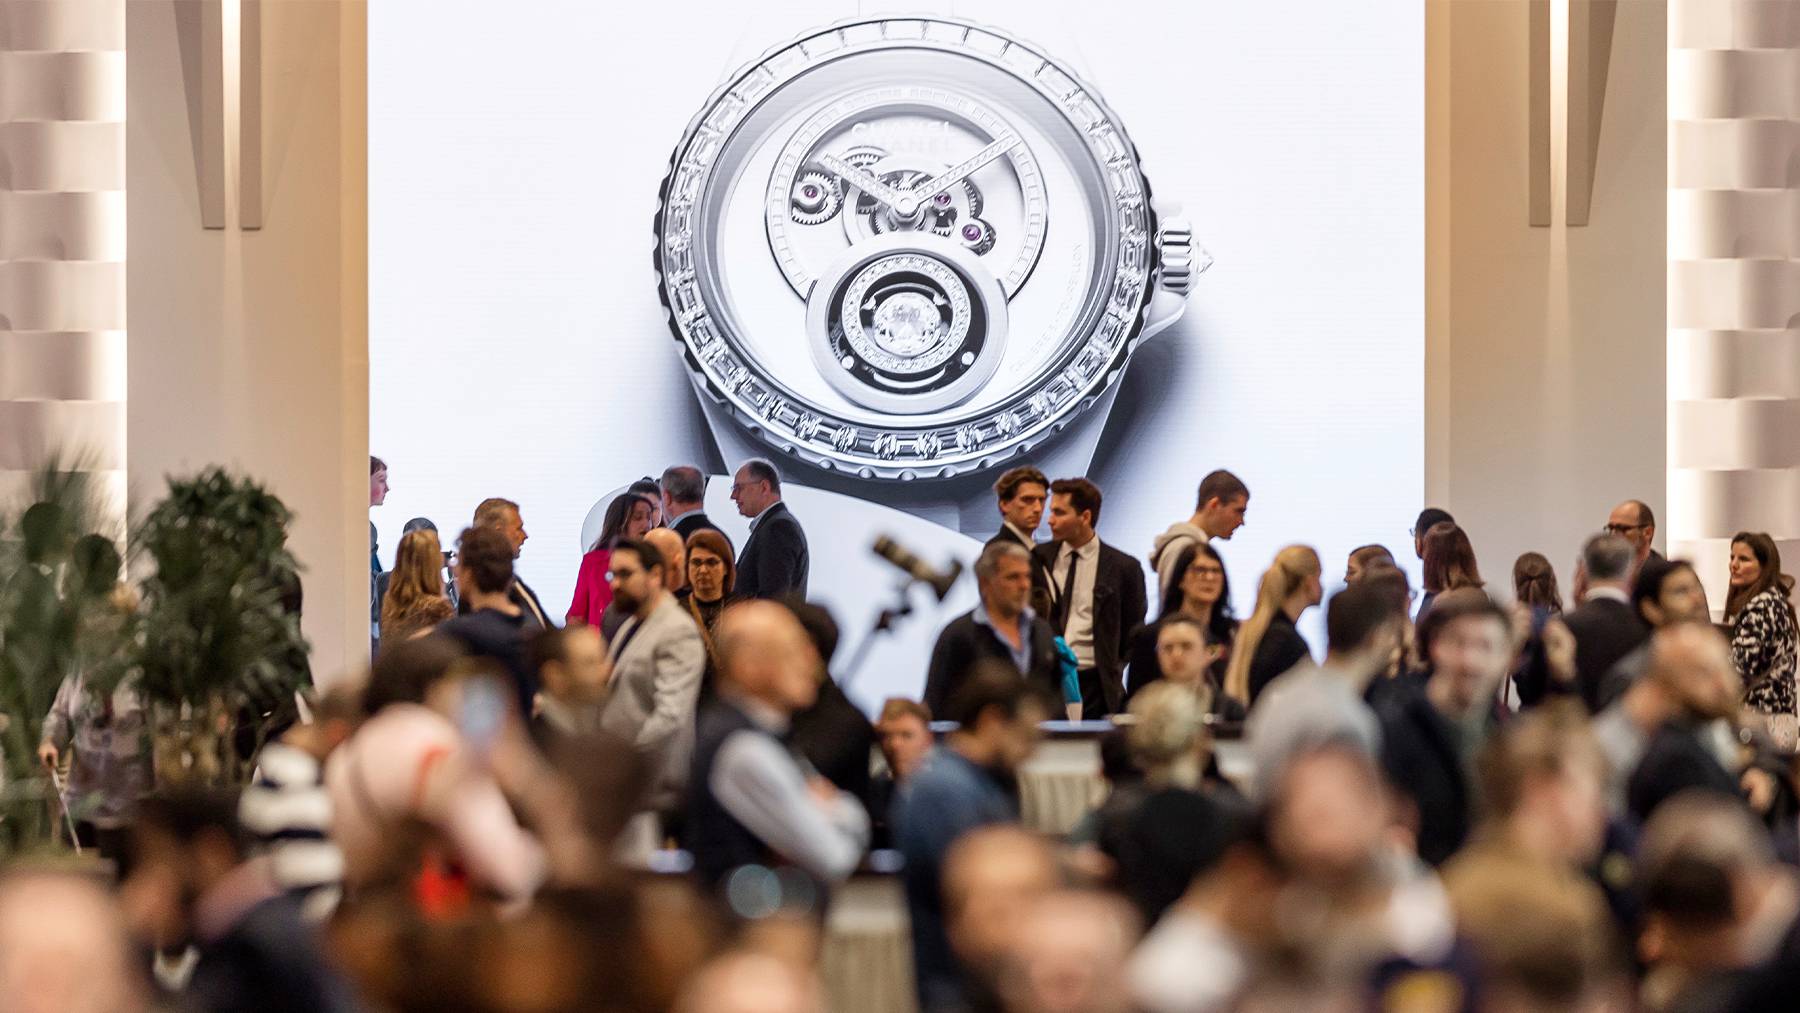 Swiss watch sales are booming but the industry may never recover the large volumes it has lost in recent years, creating new winners, losers, opportunities and threats.